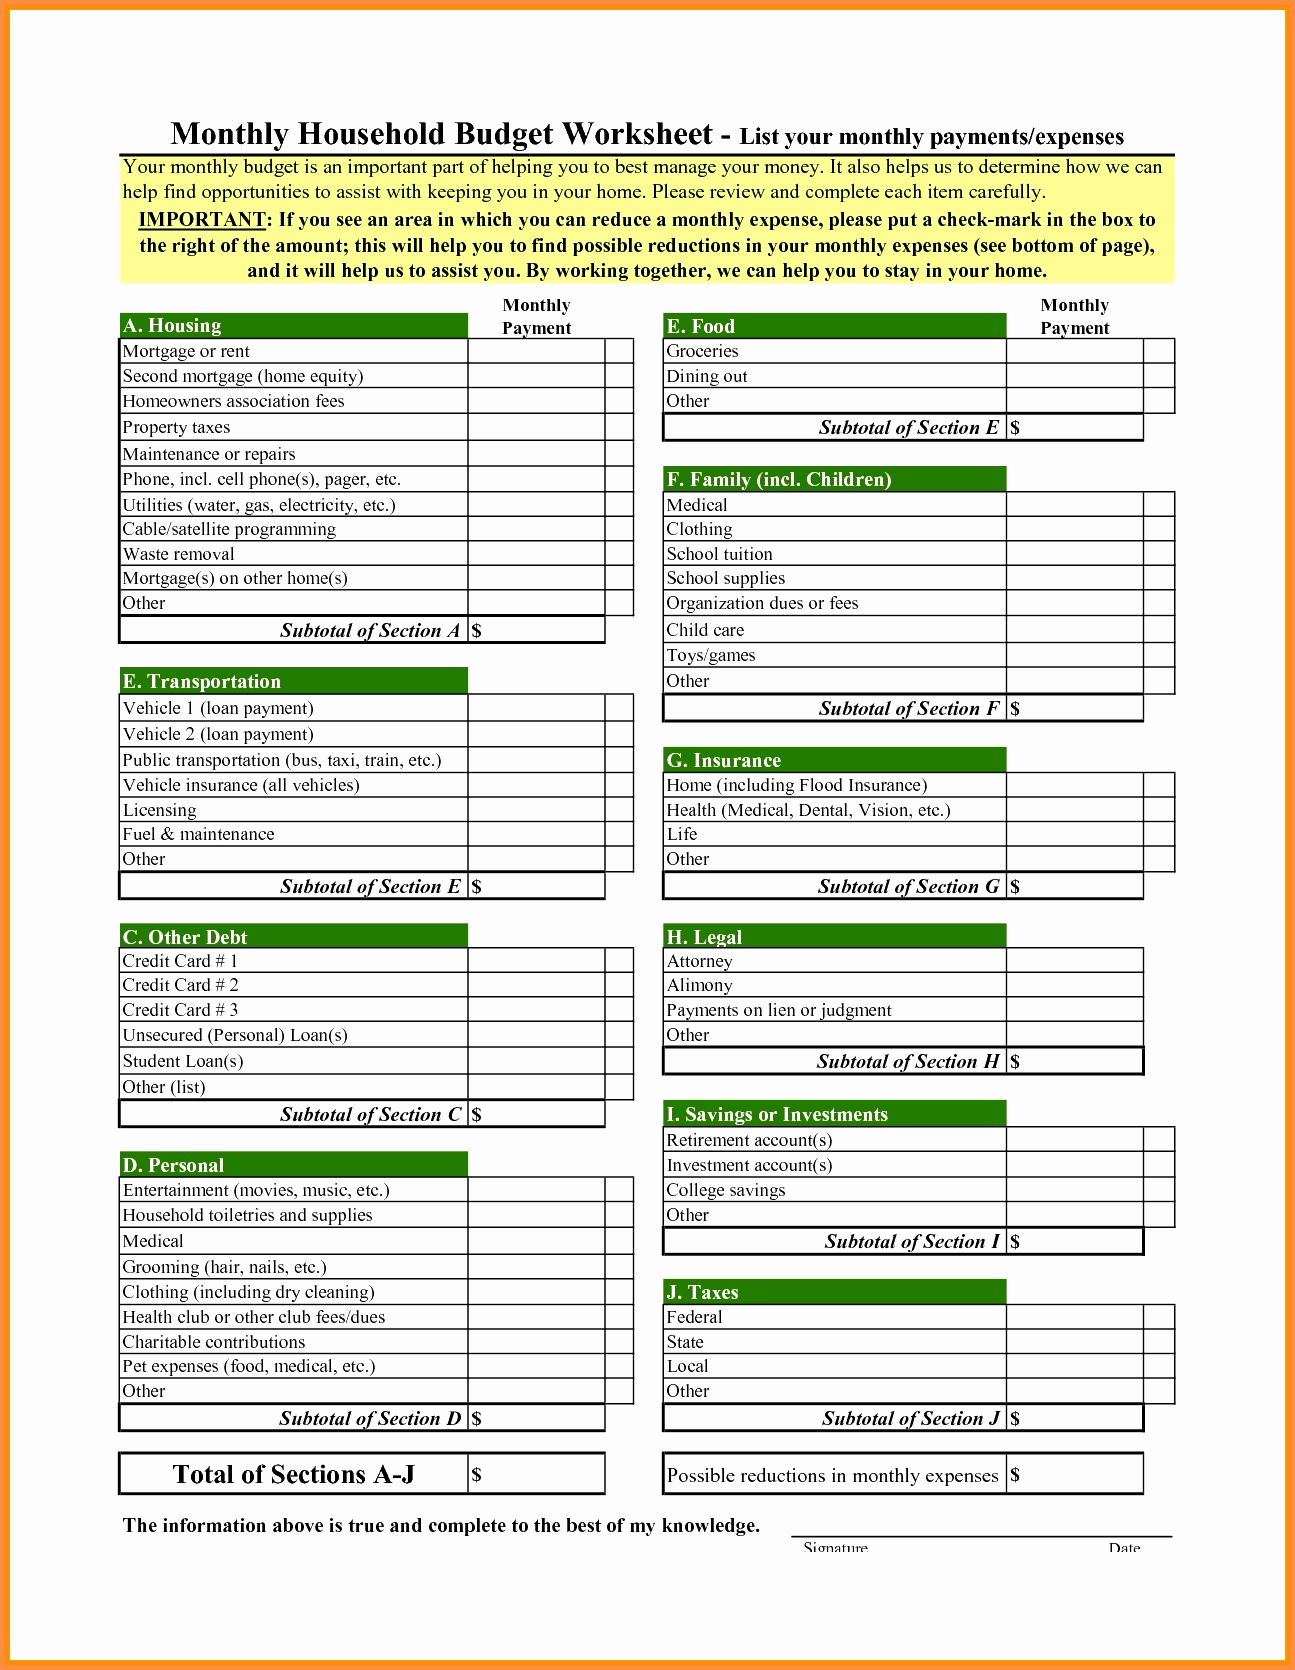 50 Awesome Food Cost Spreadsheet Excel Free - Document Ideas And Food Cost Spreadsheet Free